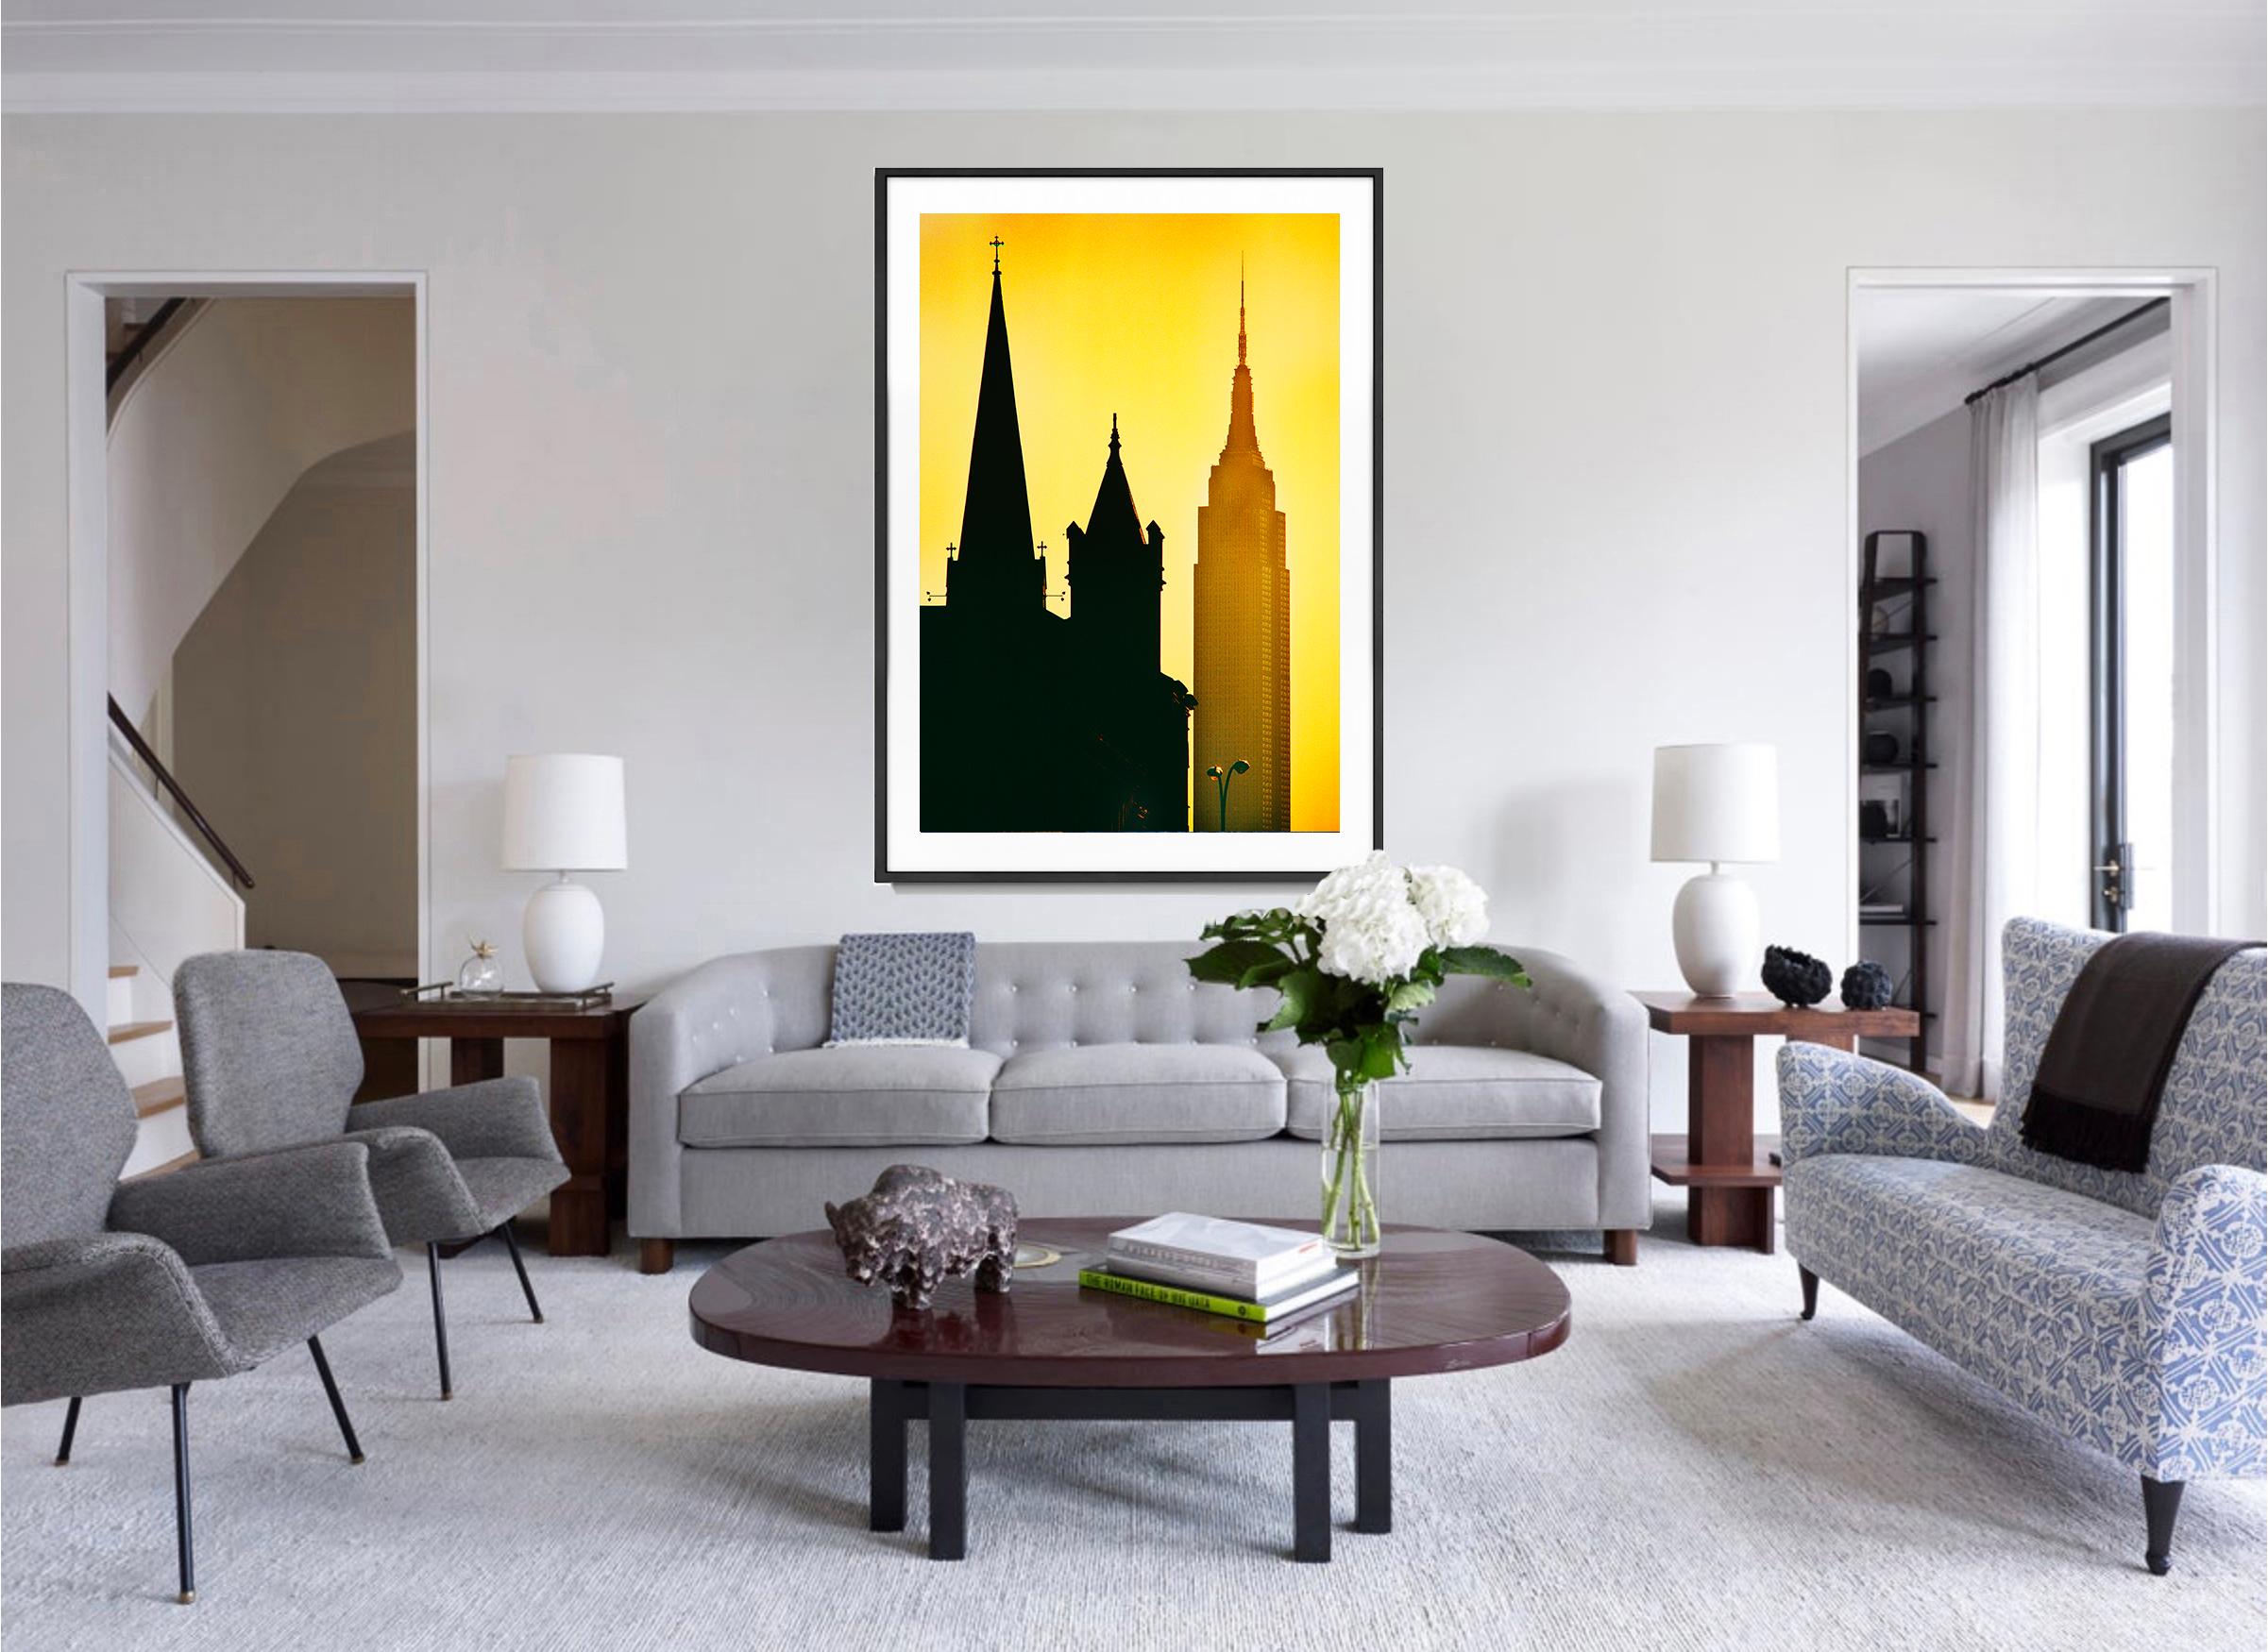 Inspiring Spires: Empire State Building in New York City at Gold Sunset - Post-Impressionist Photograph by Mitchell Funk